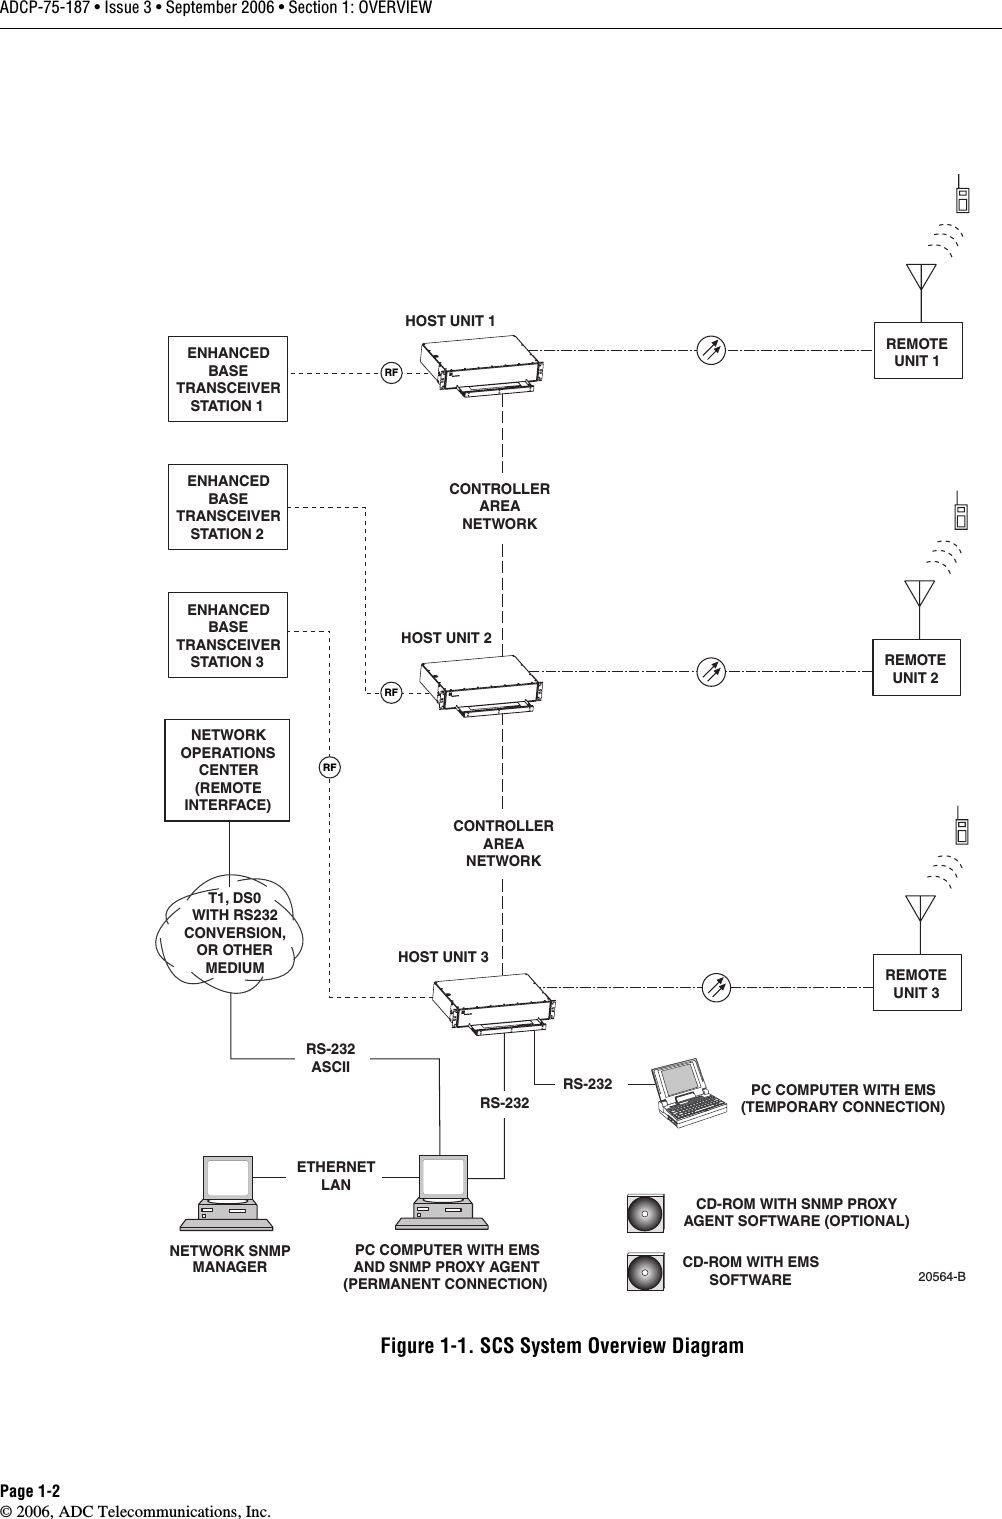 ADCP-75-187 • Issue 3 • September 2006 • Section 1: OVERVIEWPage 1-2© 2006, ADC Telecommunications, Inc.Figure 1-1. SCS System Overview DiagramHOST UNIT 1HOST UNIT 2HOST UNIT 3NETWORKOPERATIONSCENTER(REMOTEINTERFACE)CONTROLLERAREANETWORK20564-BRFRFRFCONTROLLERAREANETWORKREMOTEUNIT 1REMOTEUNIT 3REMOTEUNIT 2PC COMPUTER WITH EMSAND SNMP PROXY AGENT(PERMANENT CONNECTION) RS-232ASCIIRS-232CD-ROM WITH EMSSOFTWARENETWORK SNMPMANAGERCD-ROM WITH SNMP PROXYAGENT SOFTWARE (OPTIONAL)ETHERNETLANPC COMPUTER WITH EMS(TEMPORARY CONNECTION)T1, DS0WITH RS232CONVERSION,OR OTHERMEDIUMRS-232ENHANCEDBASETRANSCEIVERSTATION 1ENHANCEDBASETRANSCEIVERSTATION 2ENHANCEDBASETRANSCEIVERSTATION 3